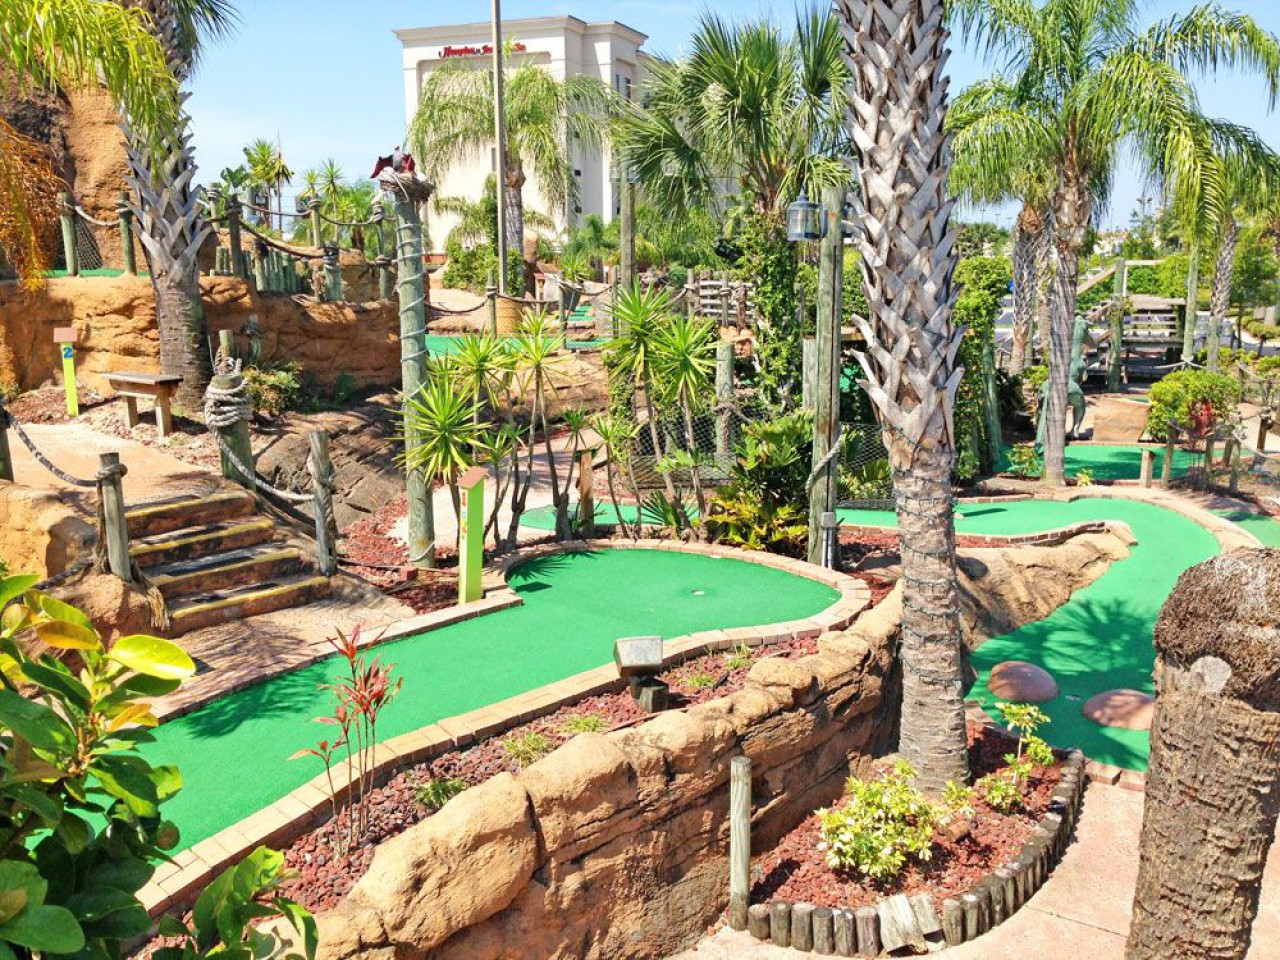 Oasis Supa Golf and Adventure Putt Mini Golf from parents who travel